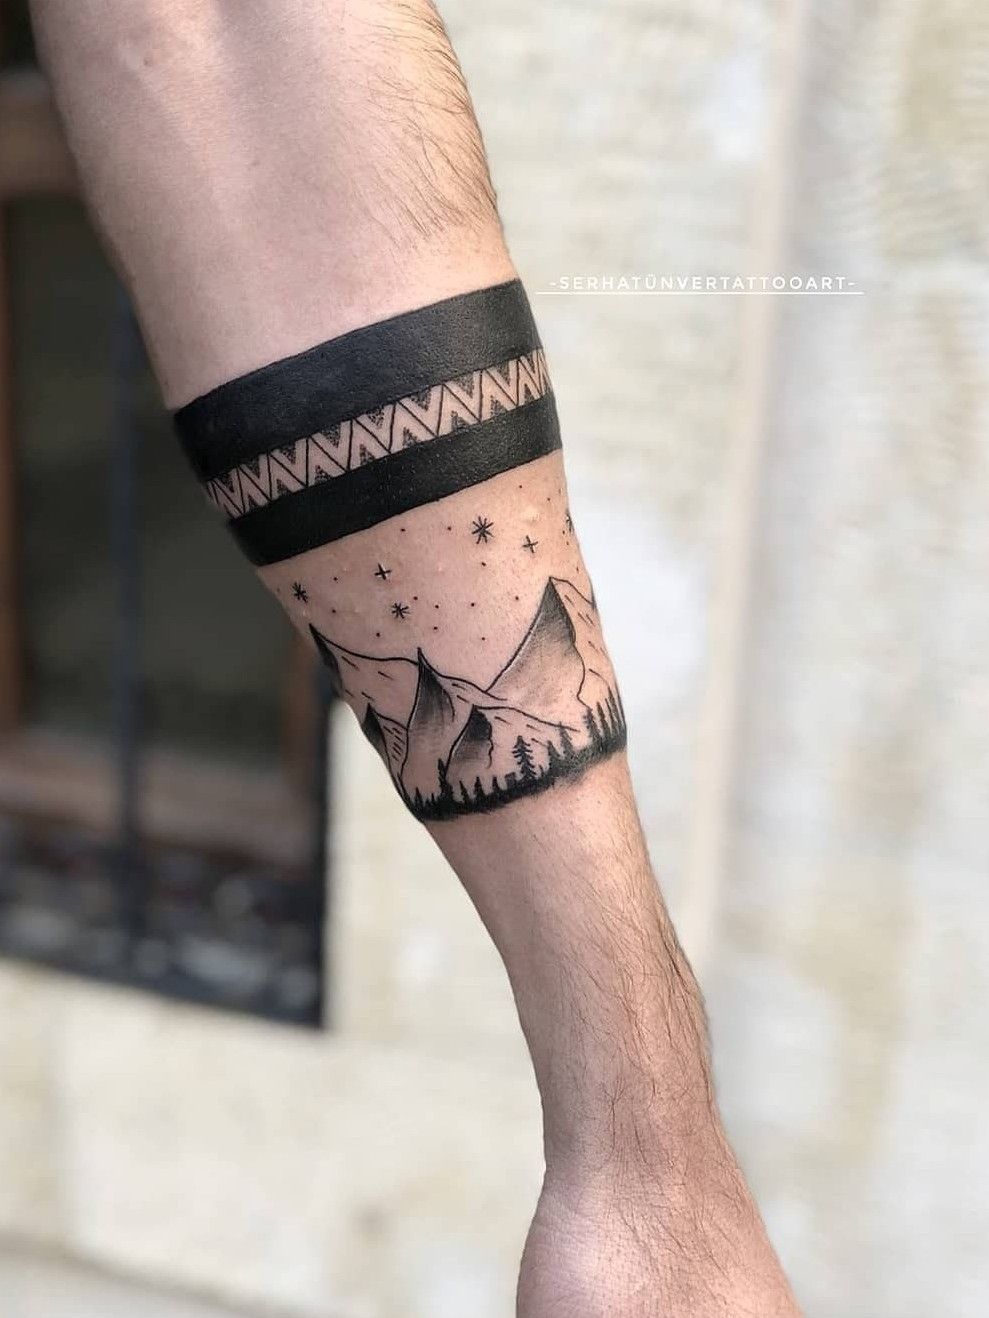 13 Best Armband Tattoo Design Ideas Meaning and Inspirations  Saved  Tattoo